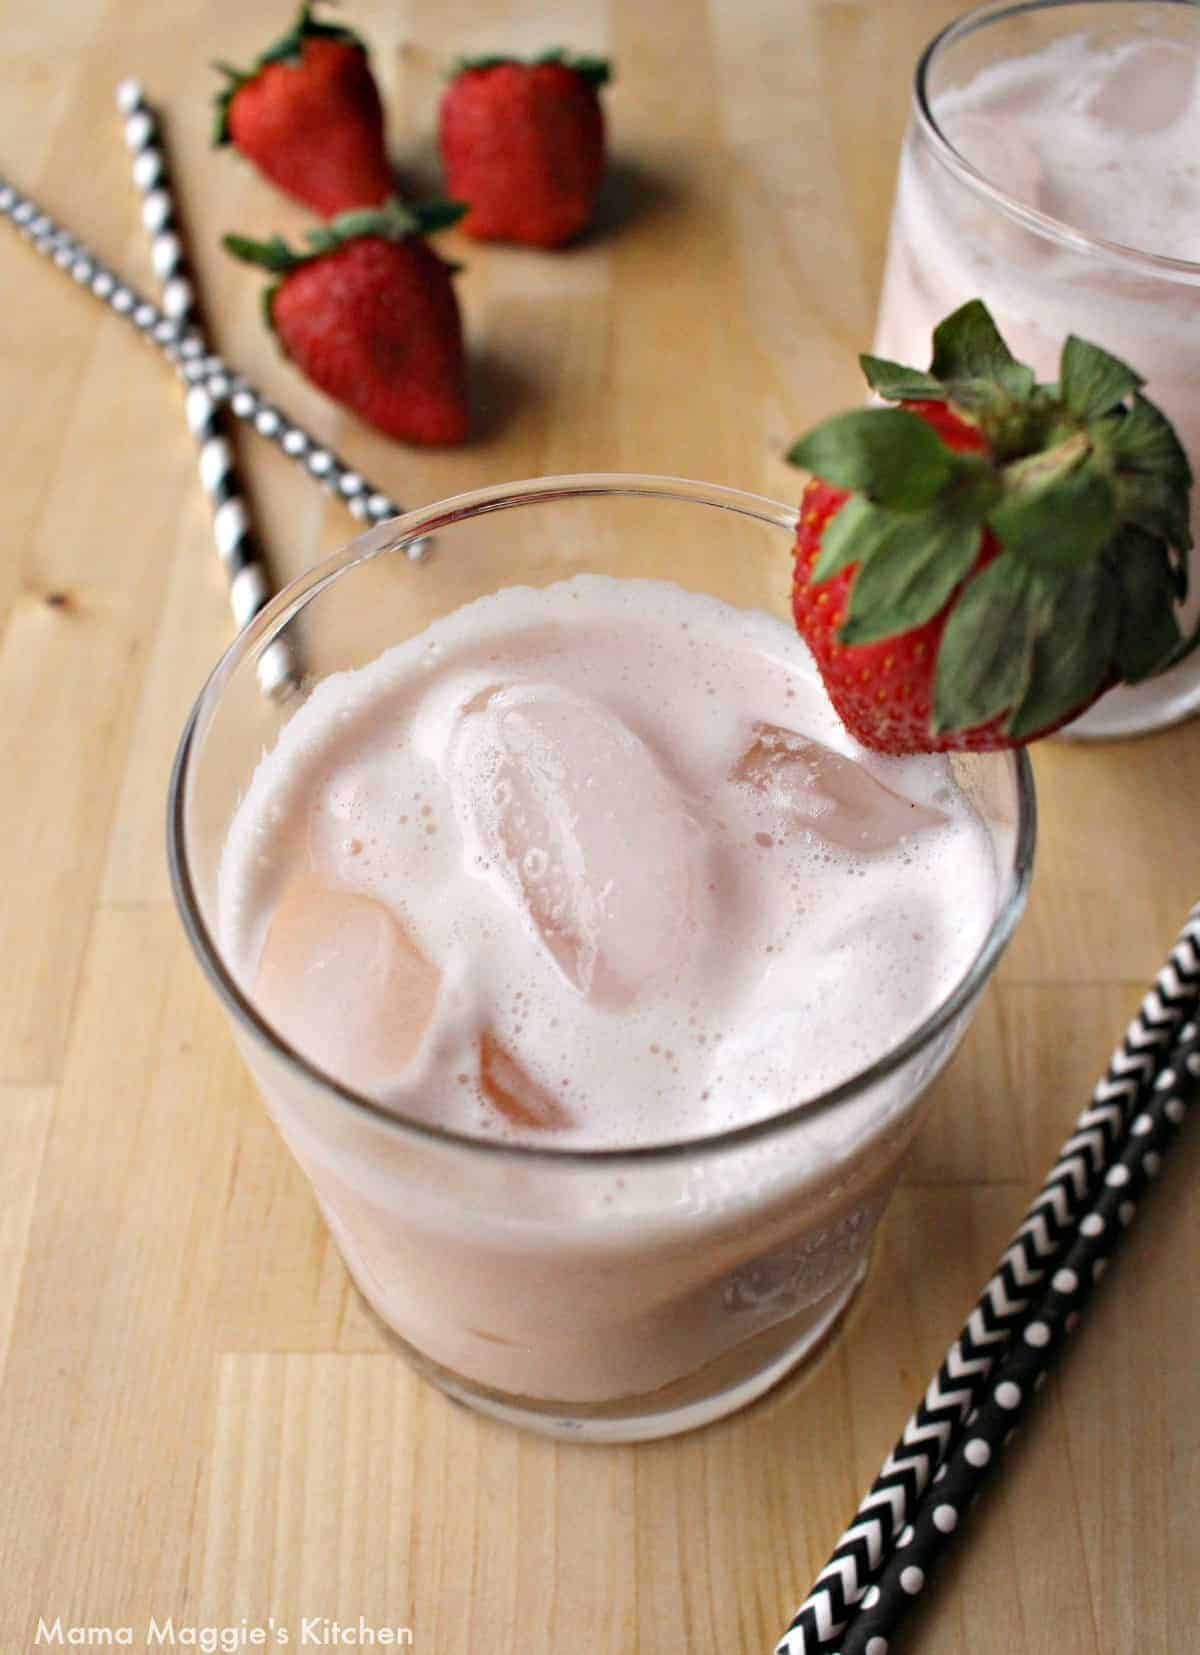 A glass of Agua de Fresa topped with a whole strawberry next to straws.